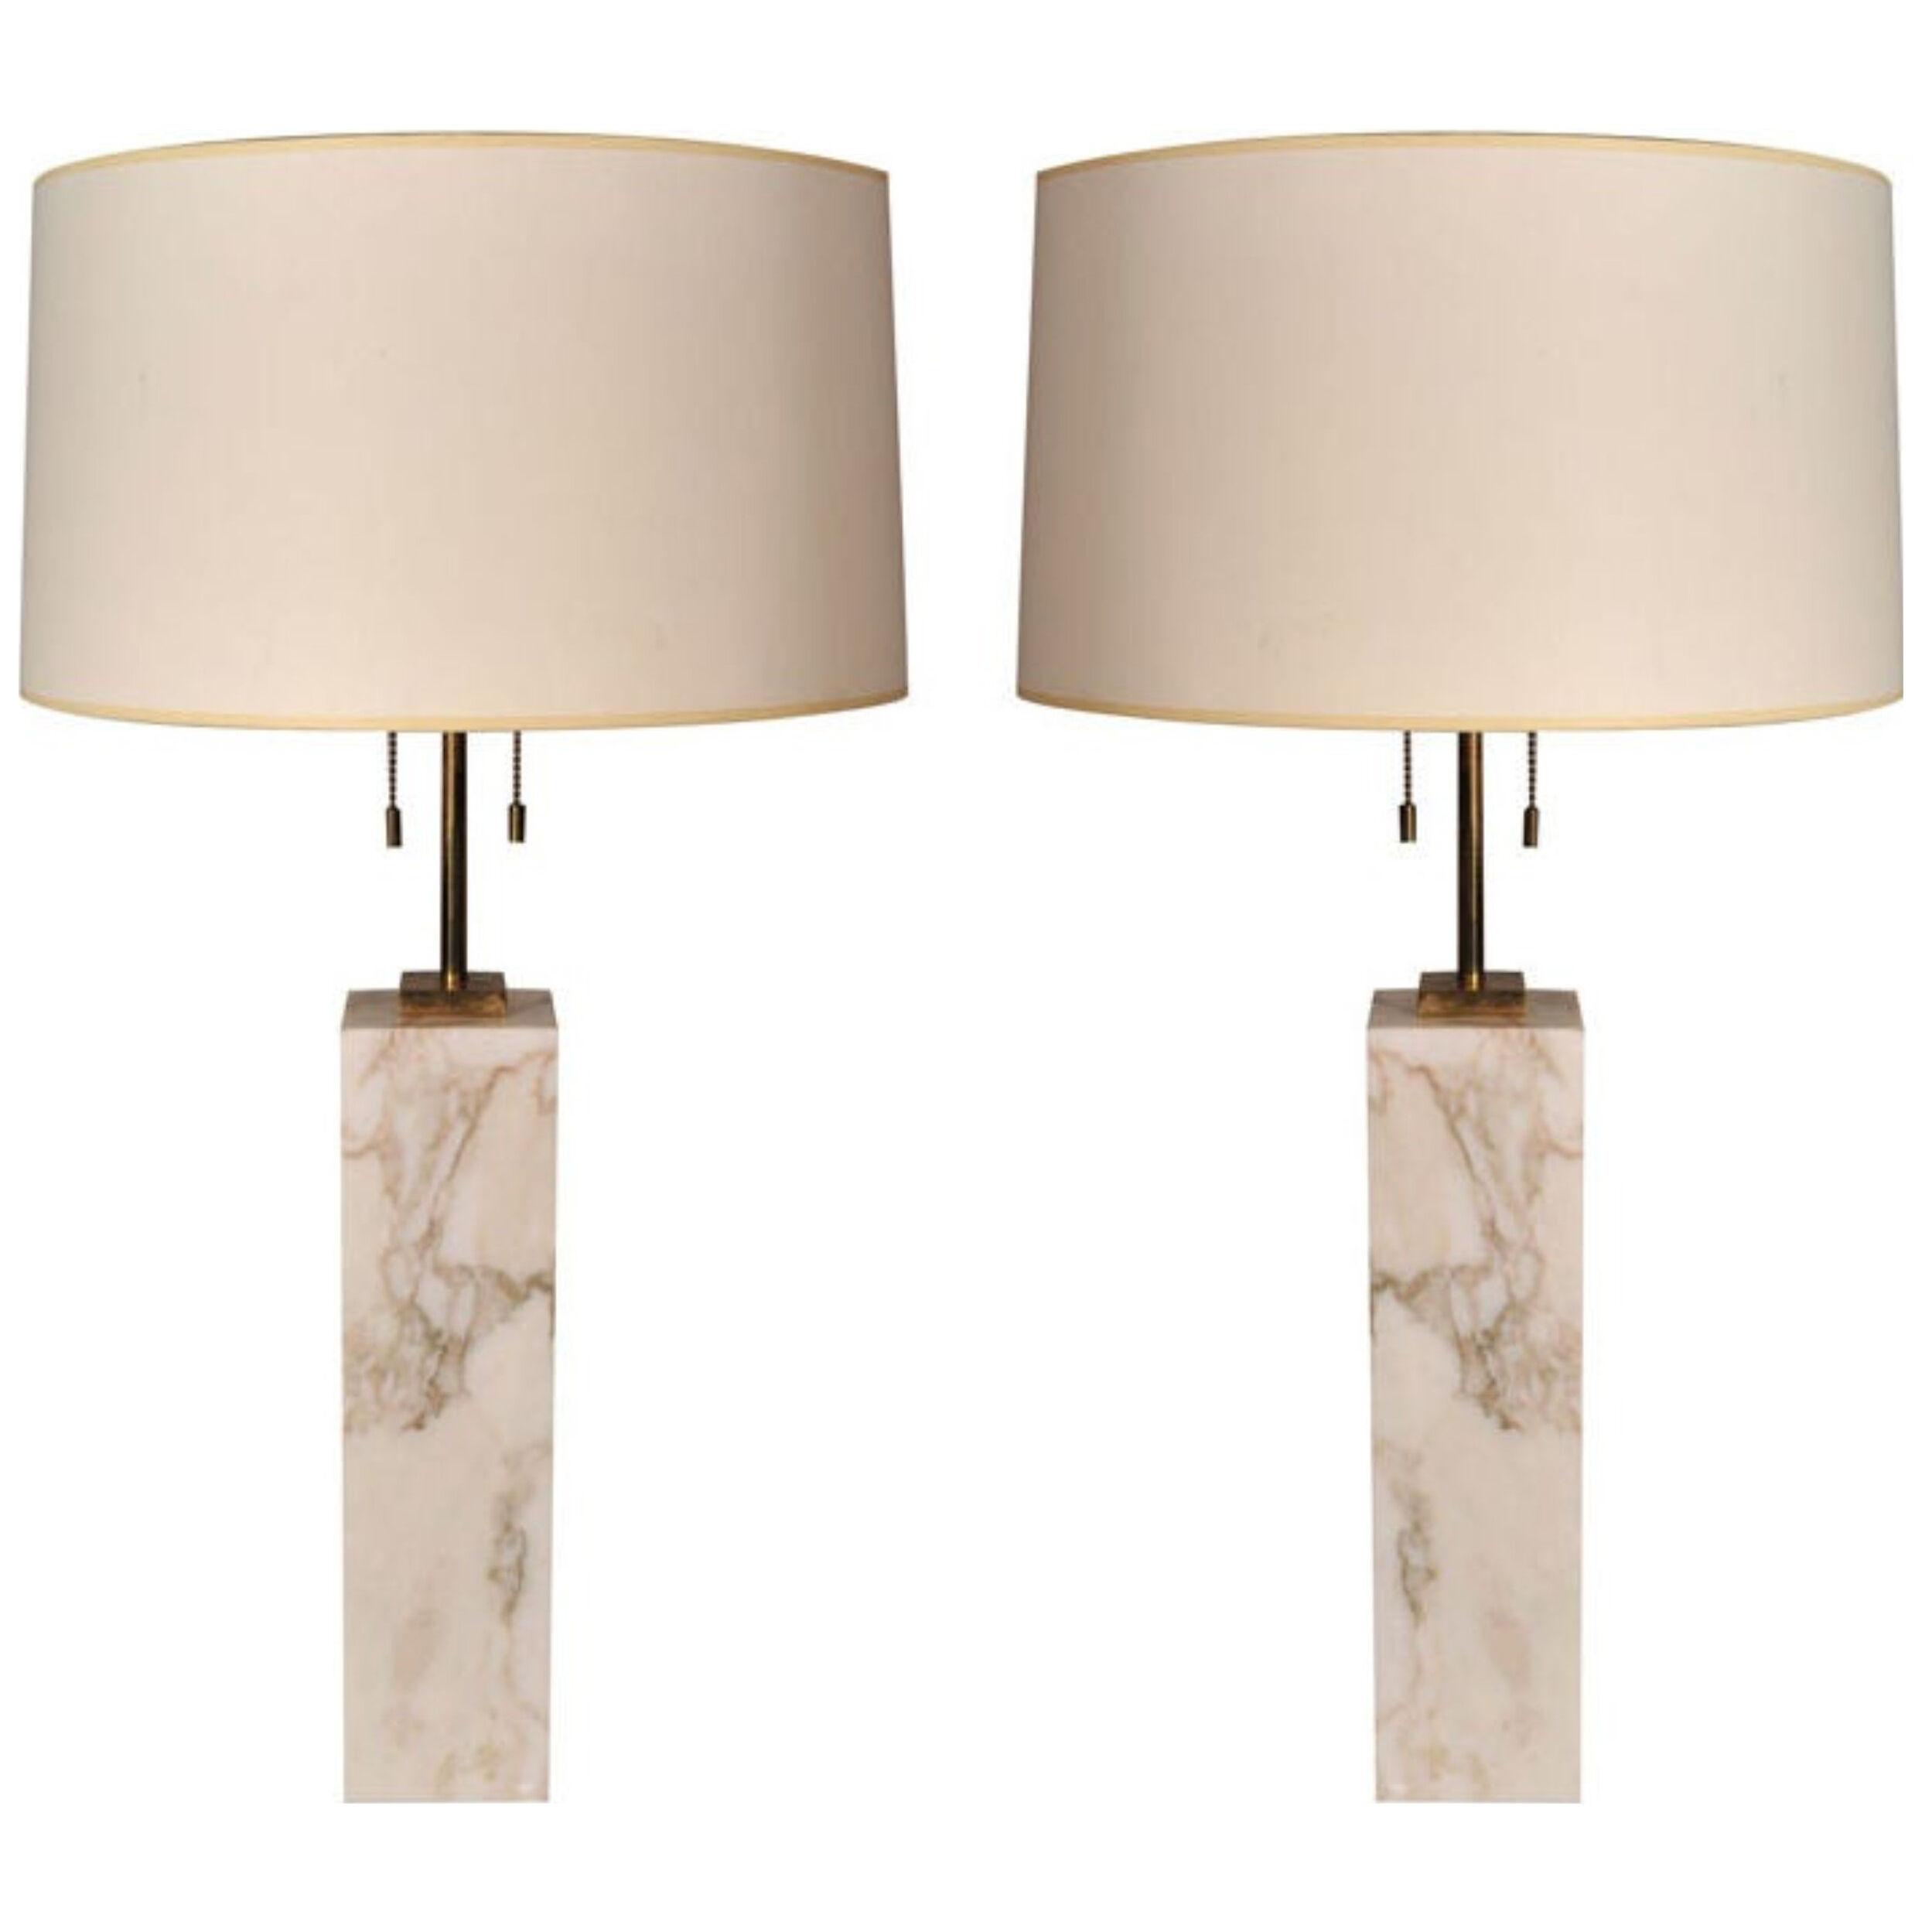 Pair of Square Marble Table Lamps by T.H. Robsjohn-Gibbings